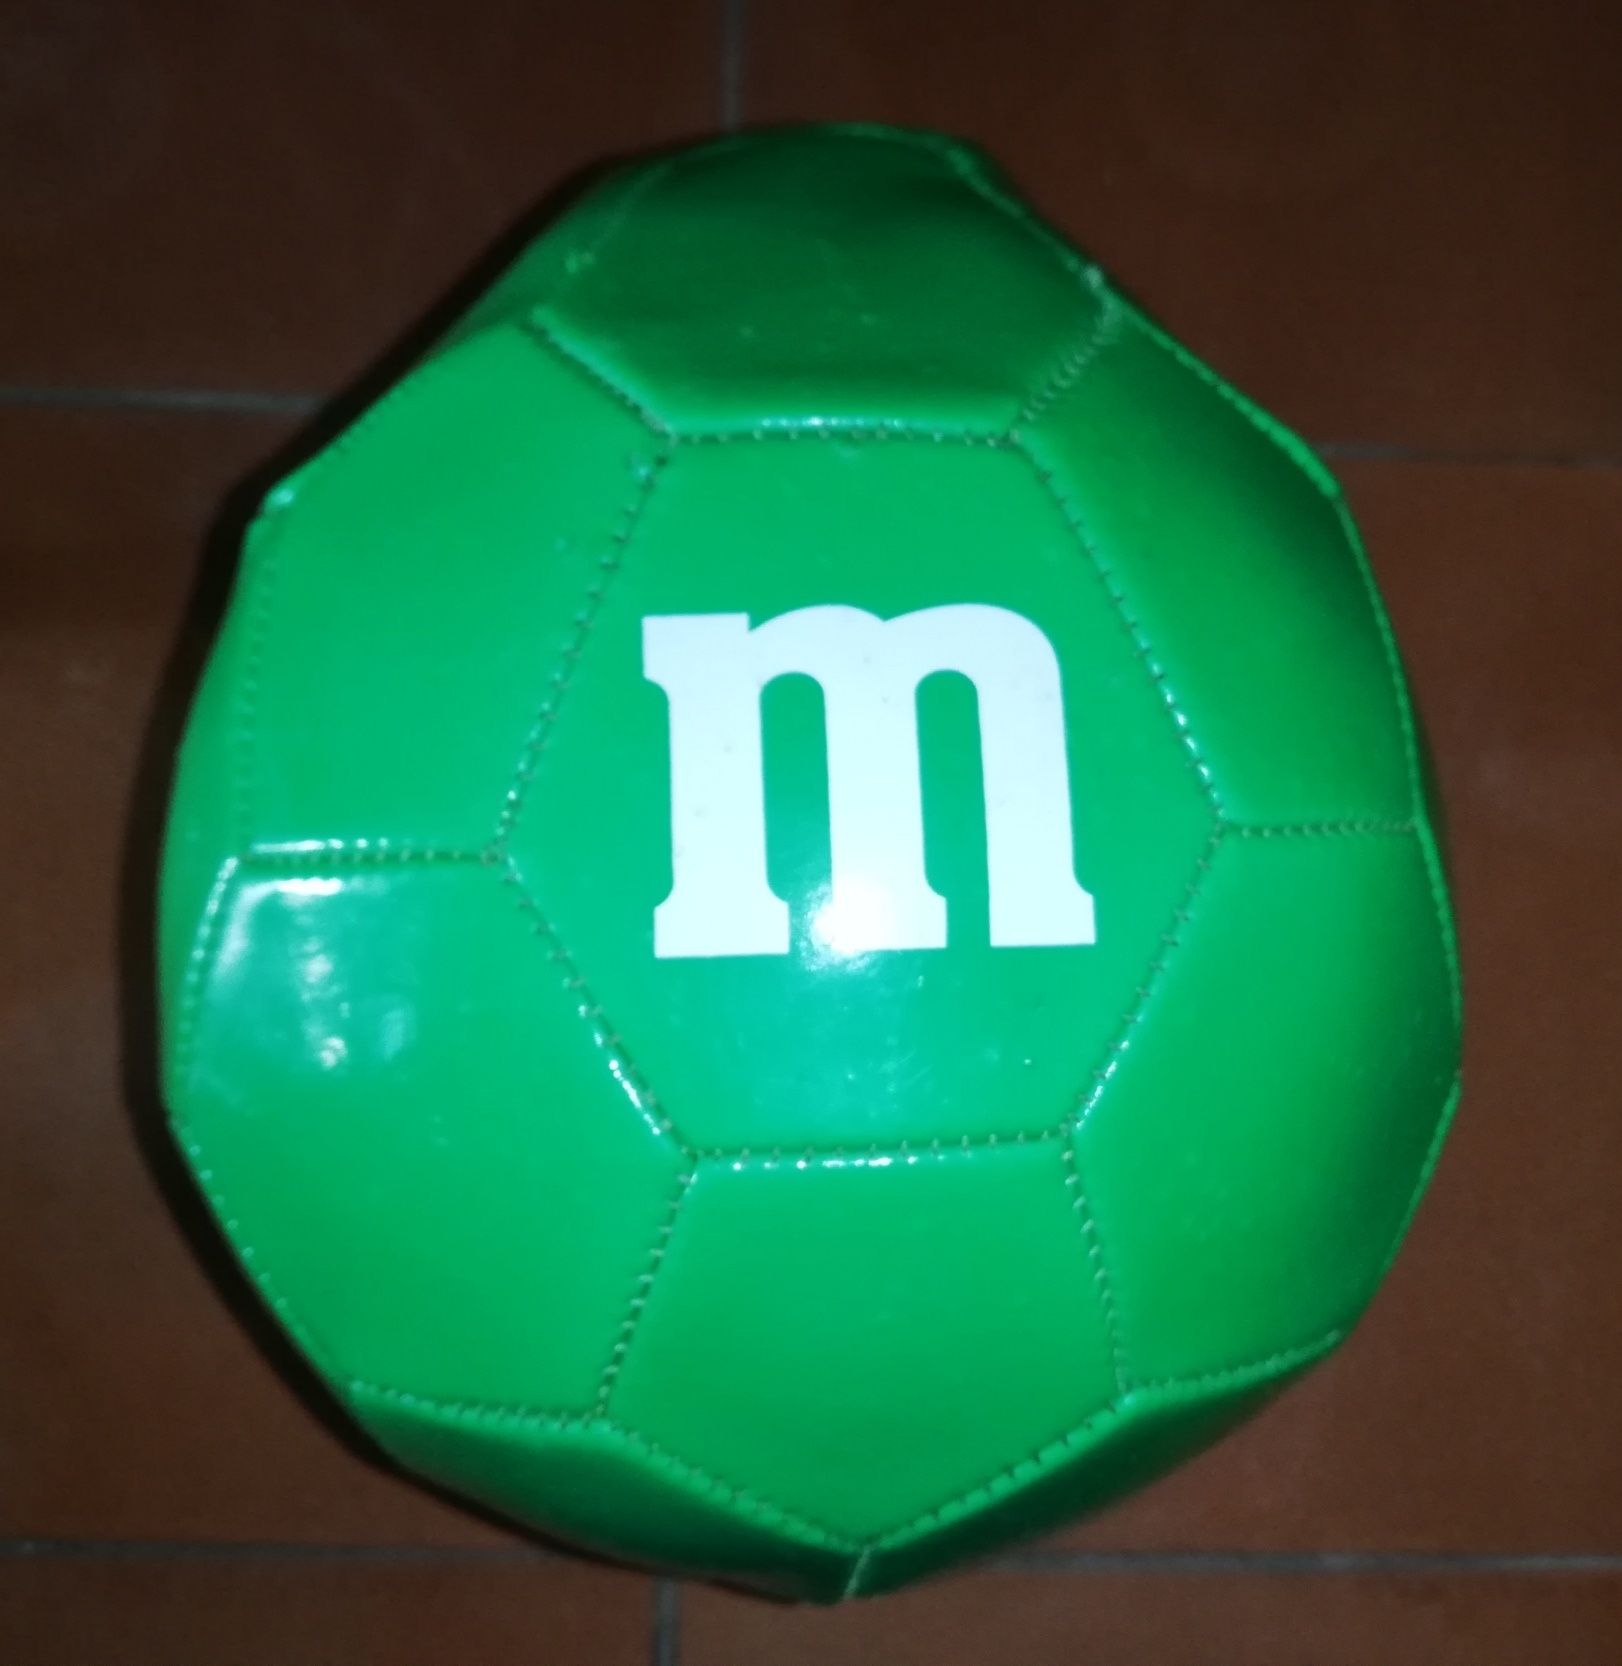 M&Ms "Bola"